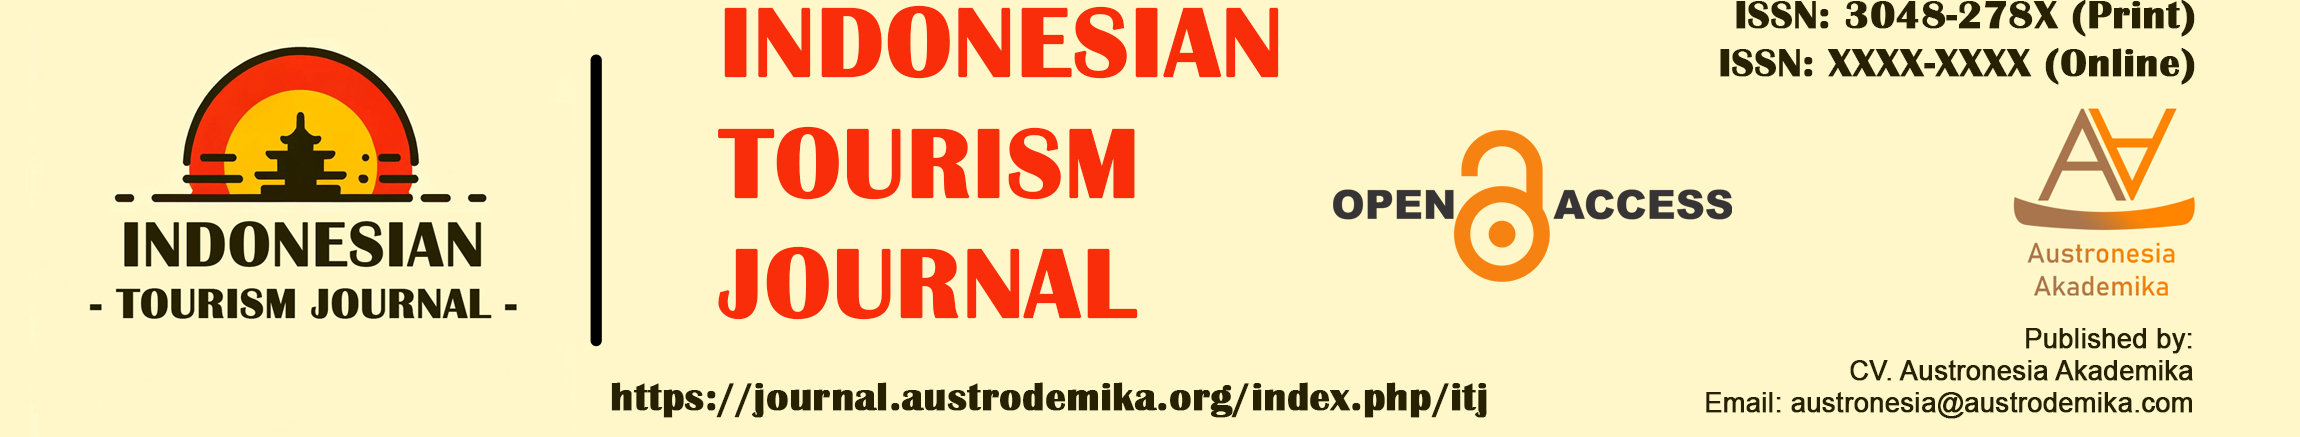 Indonesia Tourism Journal